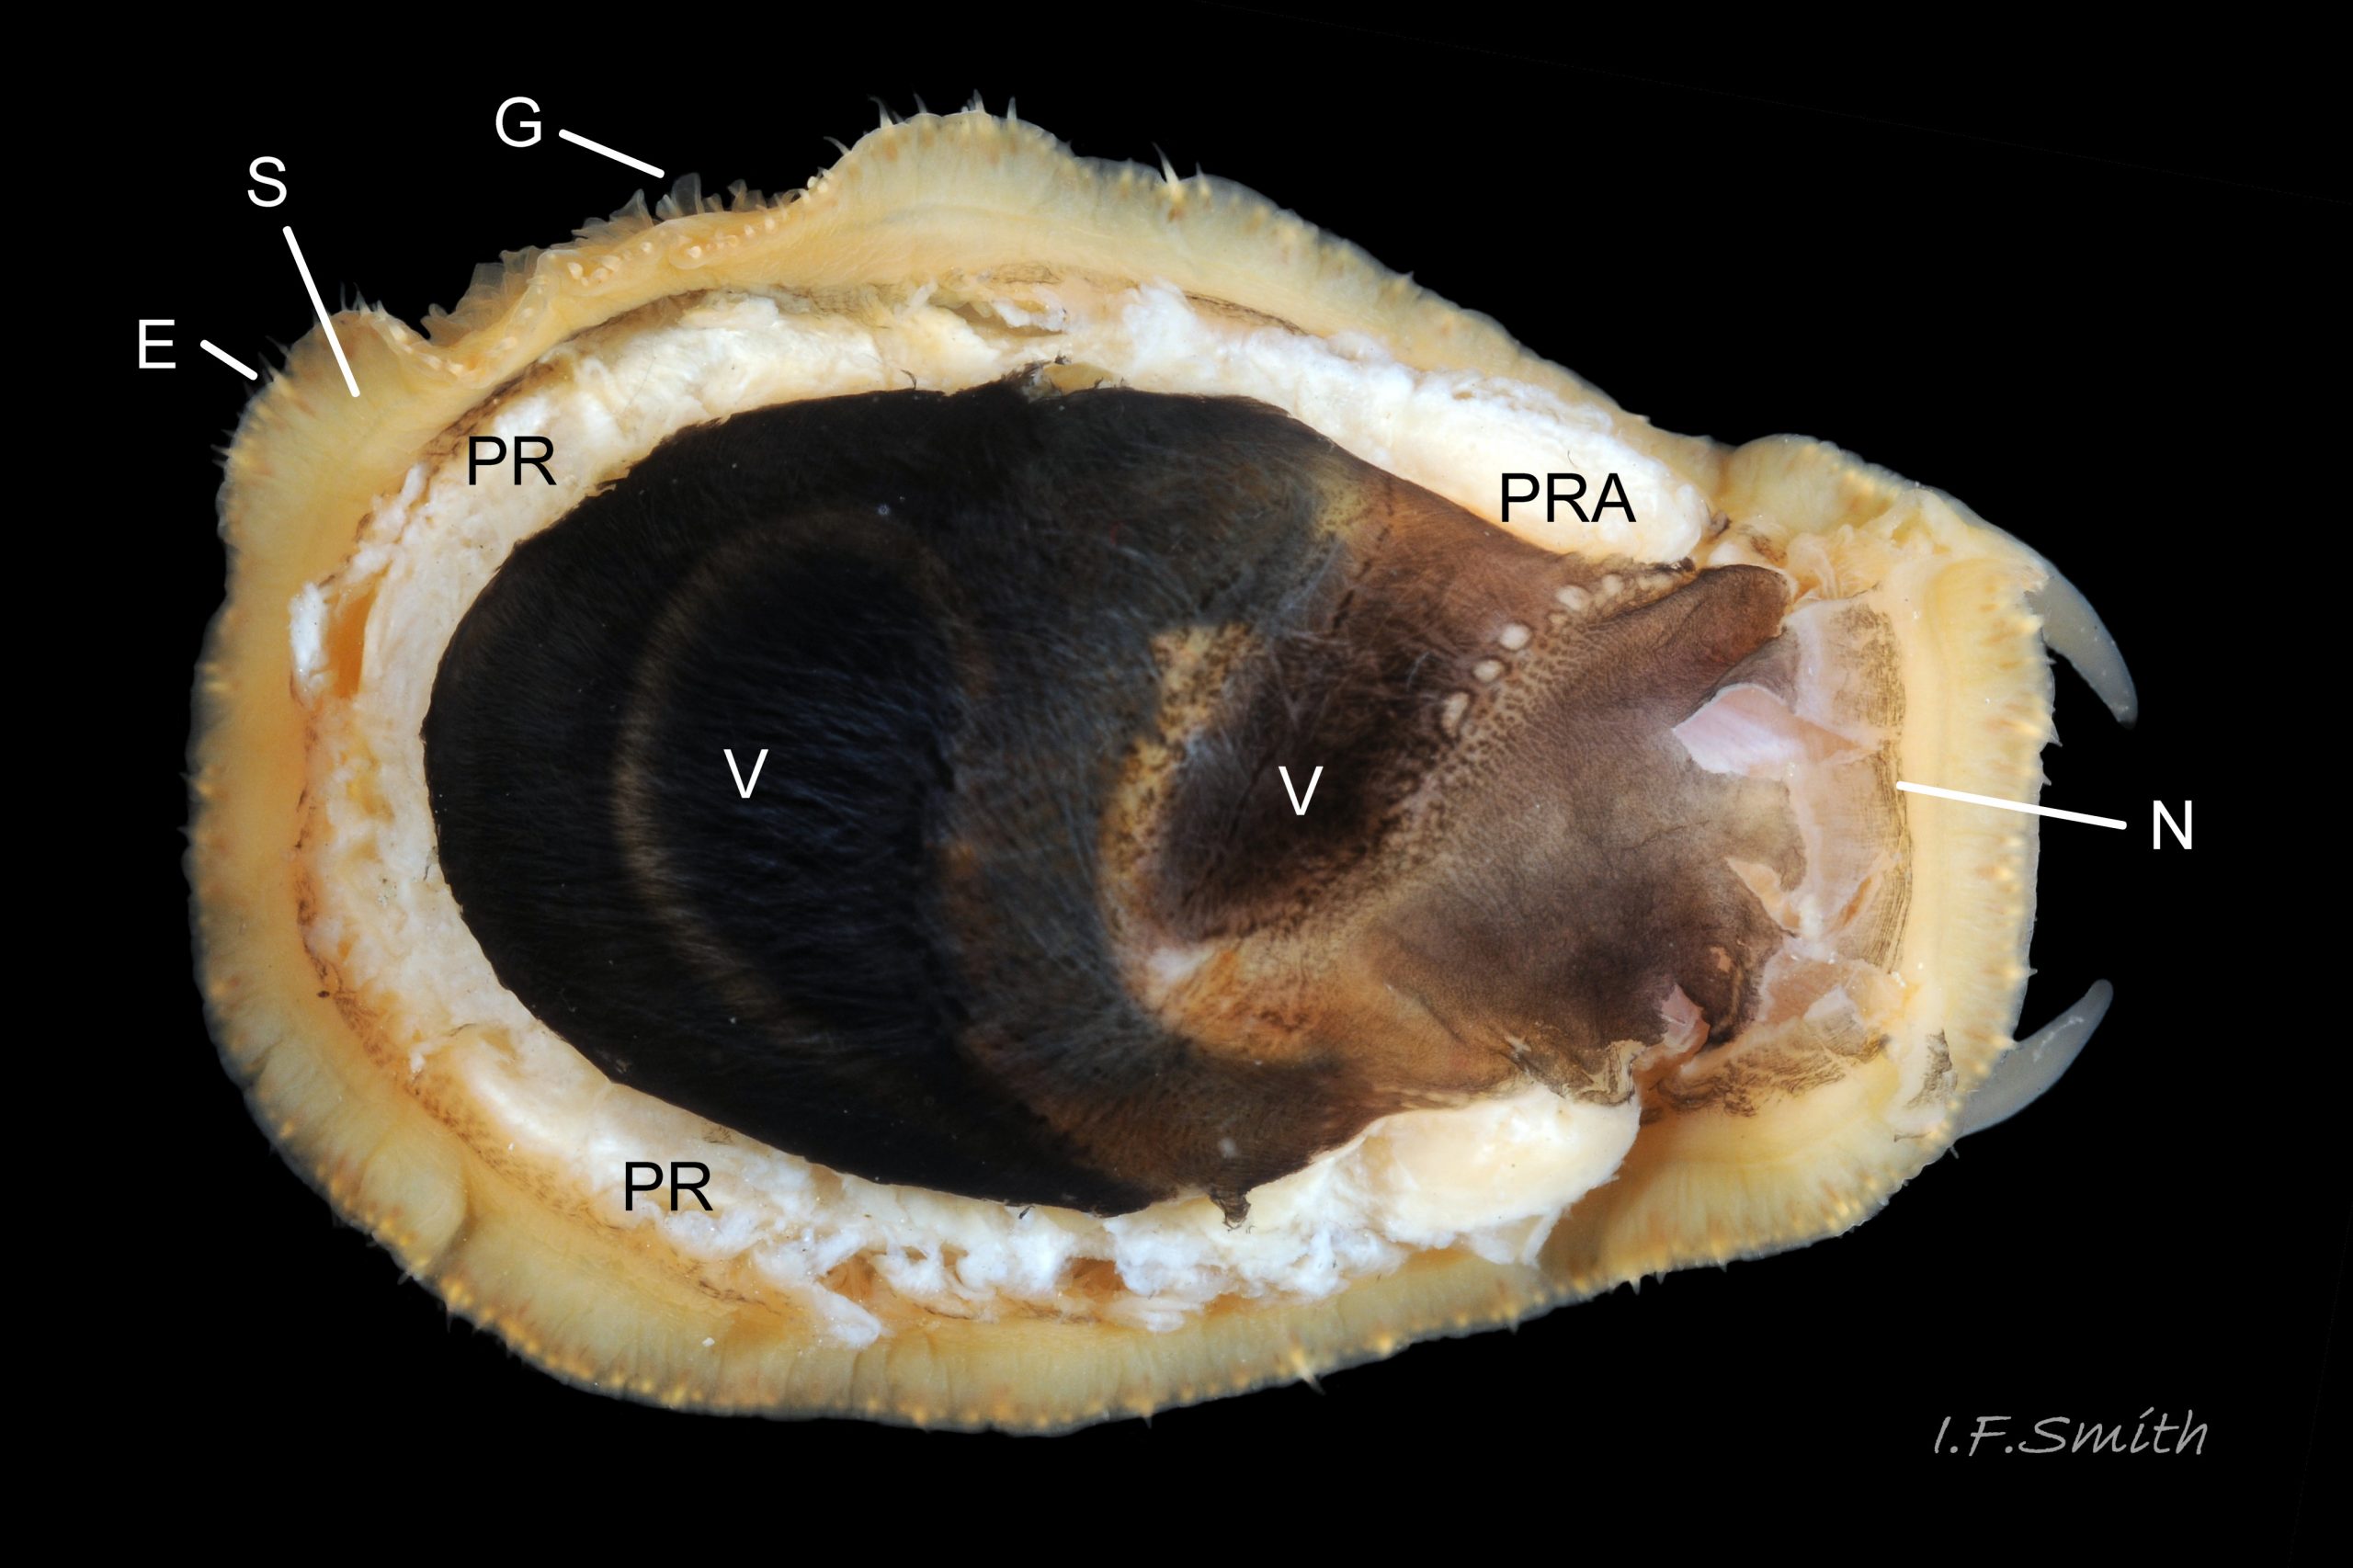 07 Patella. Full grown (shell length 40 mm) Patella ulyssiponensis removed from shell to fully expose mantle.